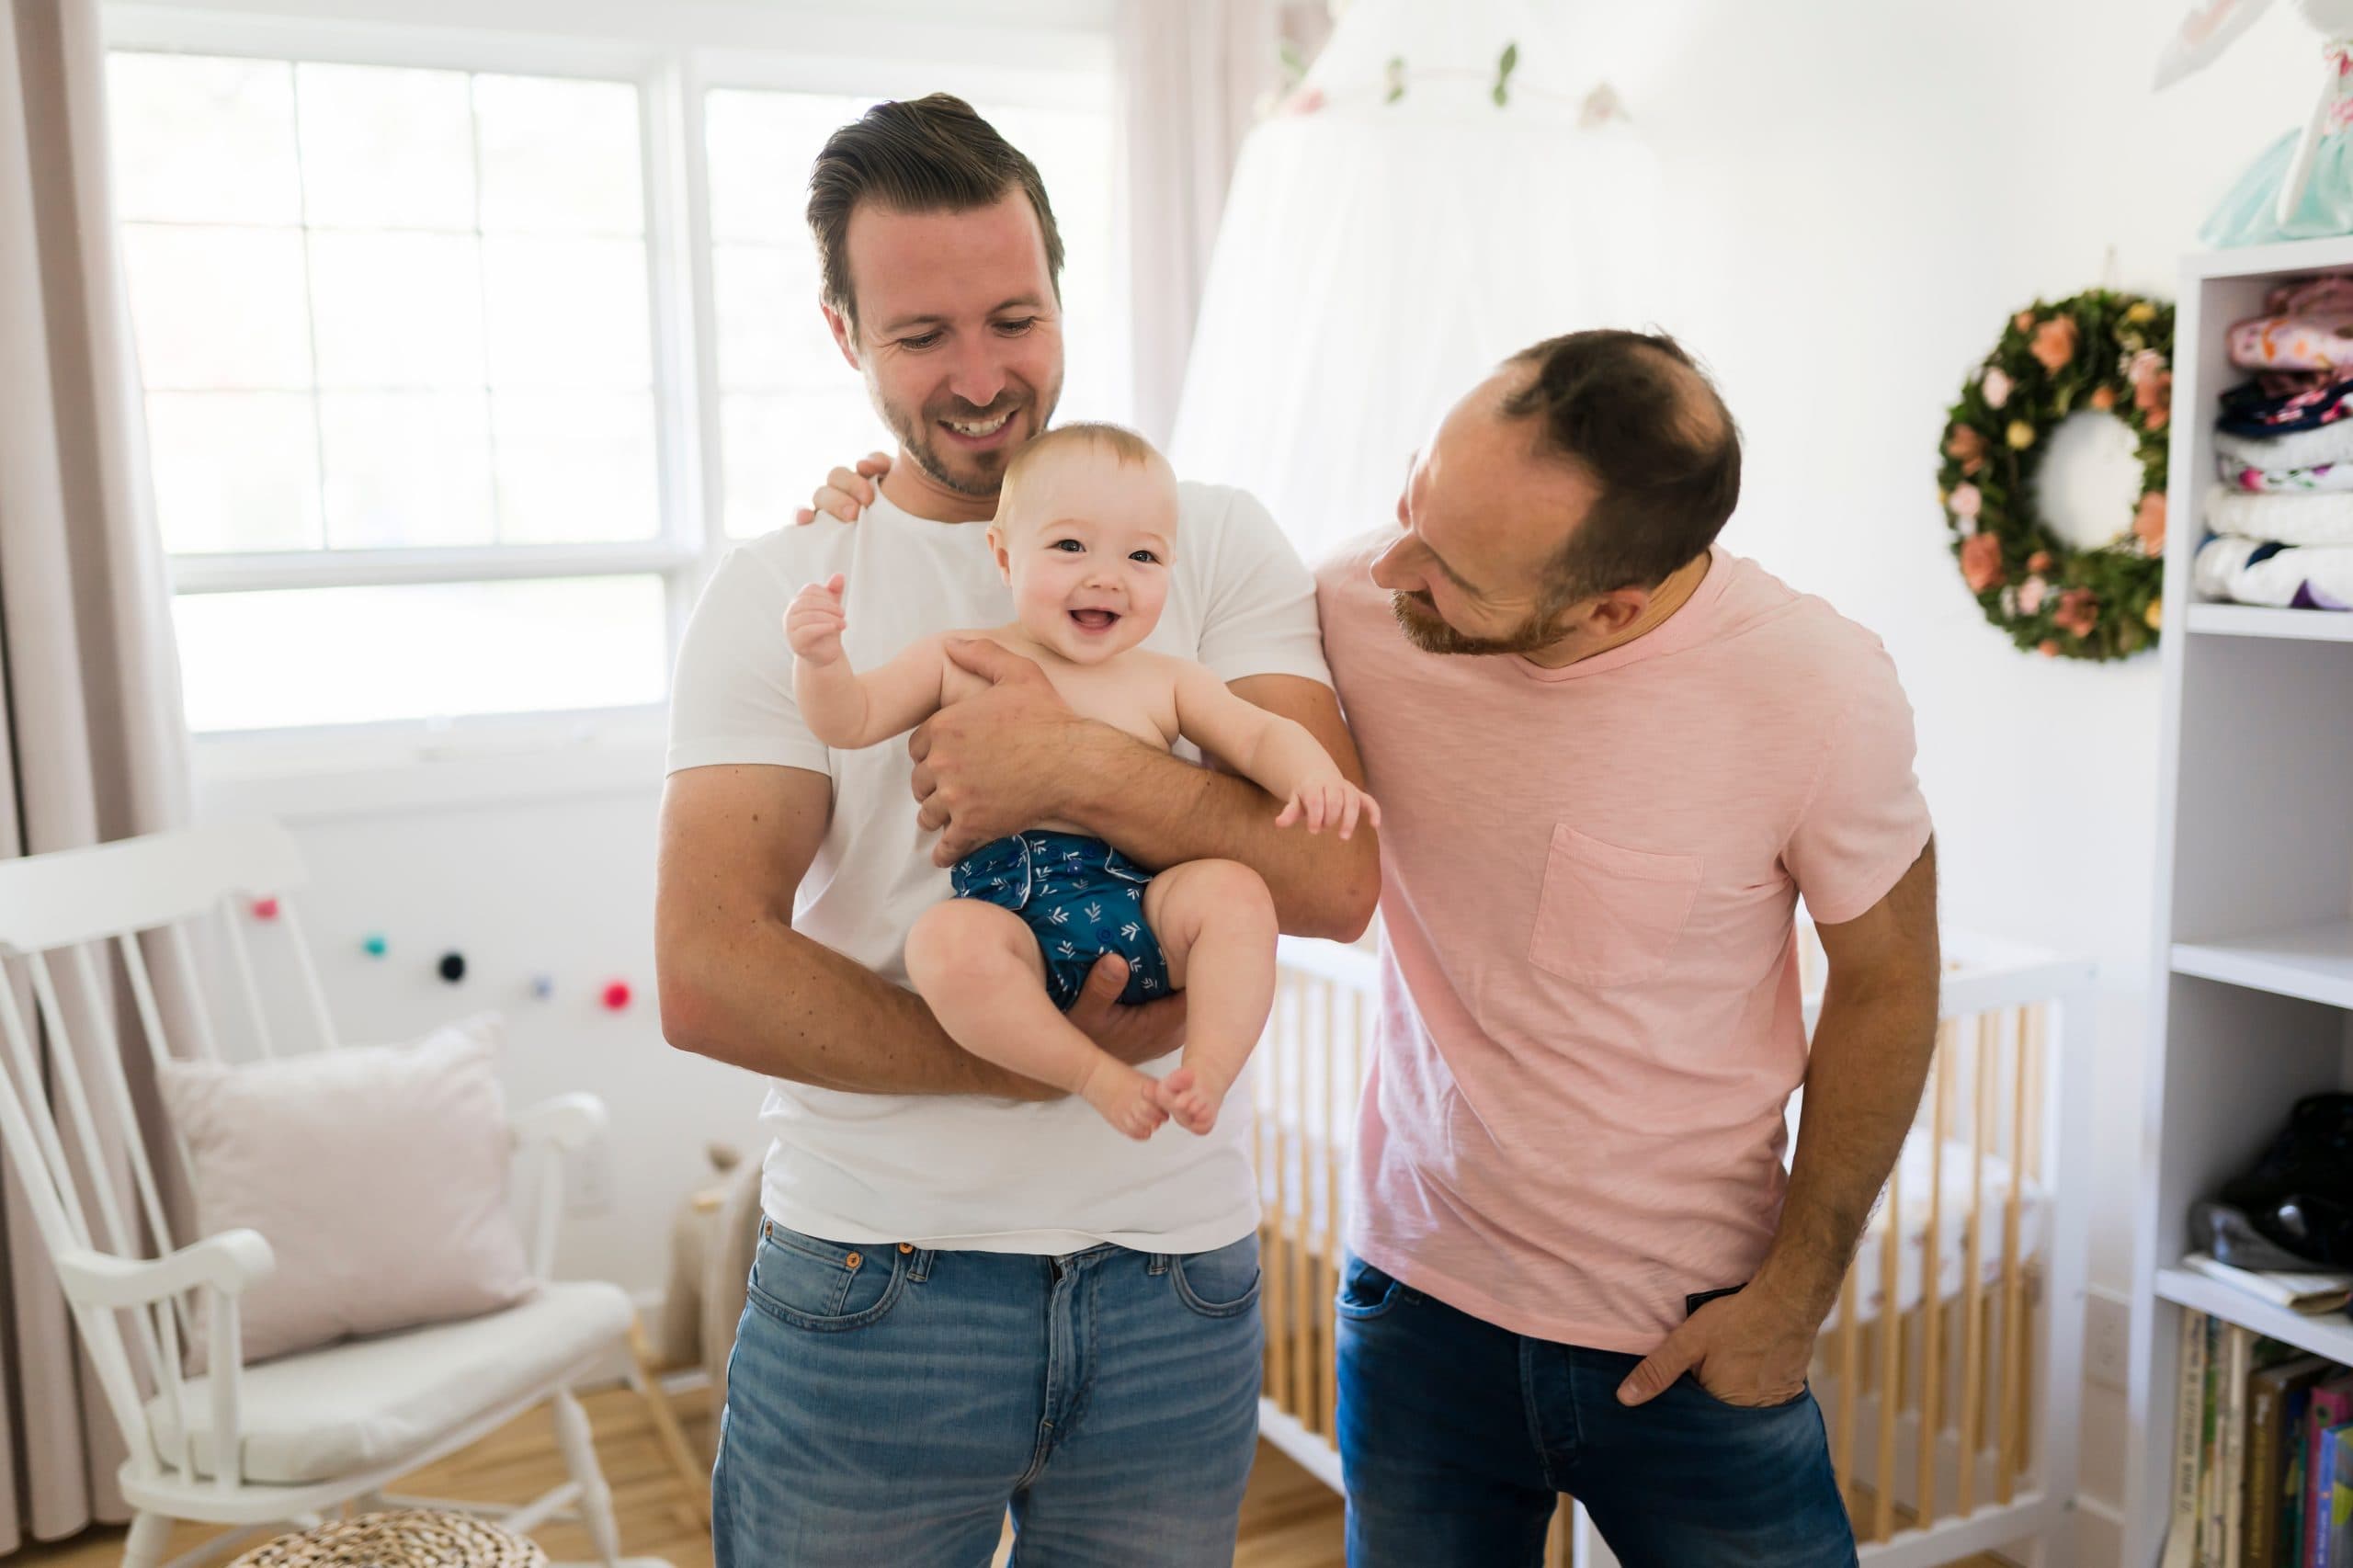 A same sex male couple enjoying holding their baby.